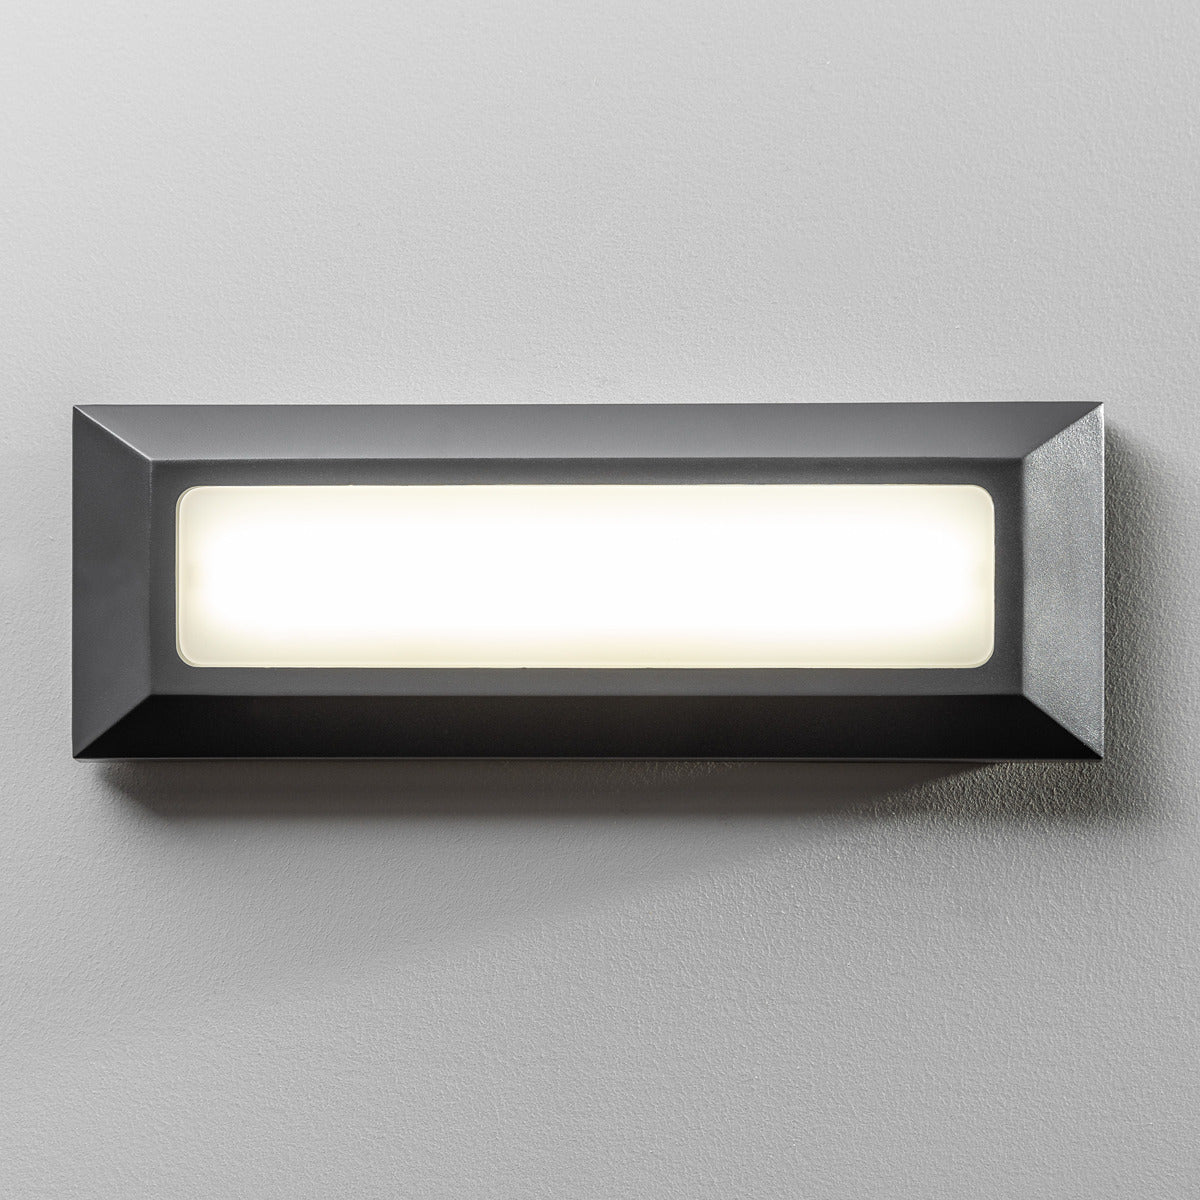 Our Rebecca dark grey LED outdoor brick light would look perfect in a modern or more traditional home design. Outside brick lights can provide atmospheric light in your garden, at the front door or on the terrace as well as a great security solution. It is designed for durability and longevity with its robust material producing a fully weatherproof and water-resistant light fitting. Save money on your lighting, this brick light runs on low energy consumption LED which means its low cost to run.